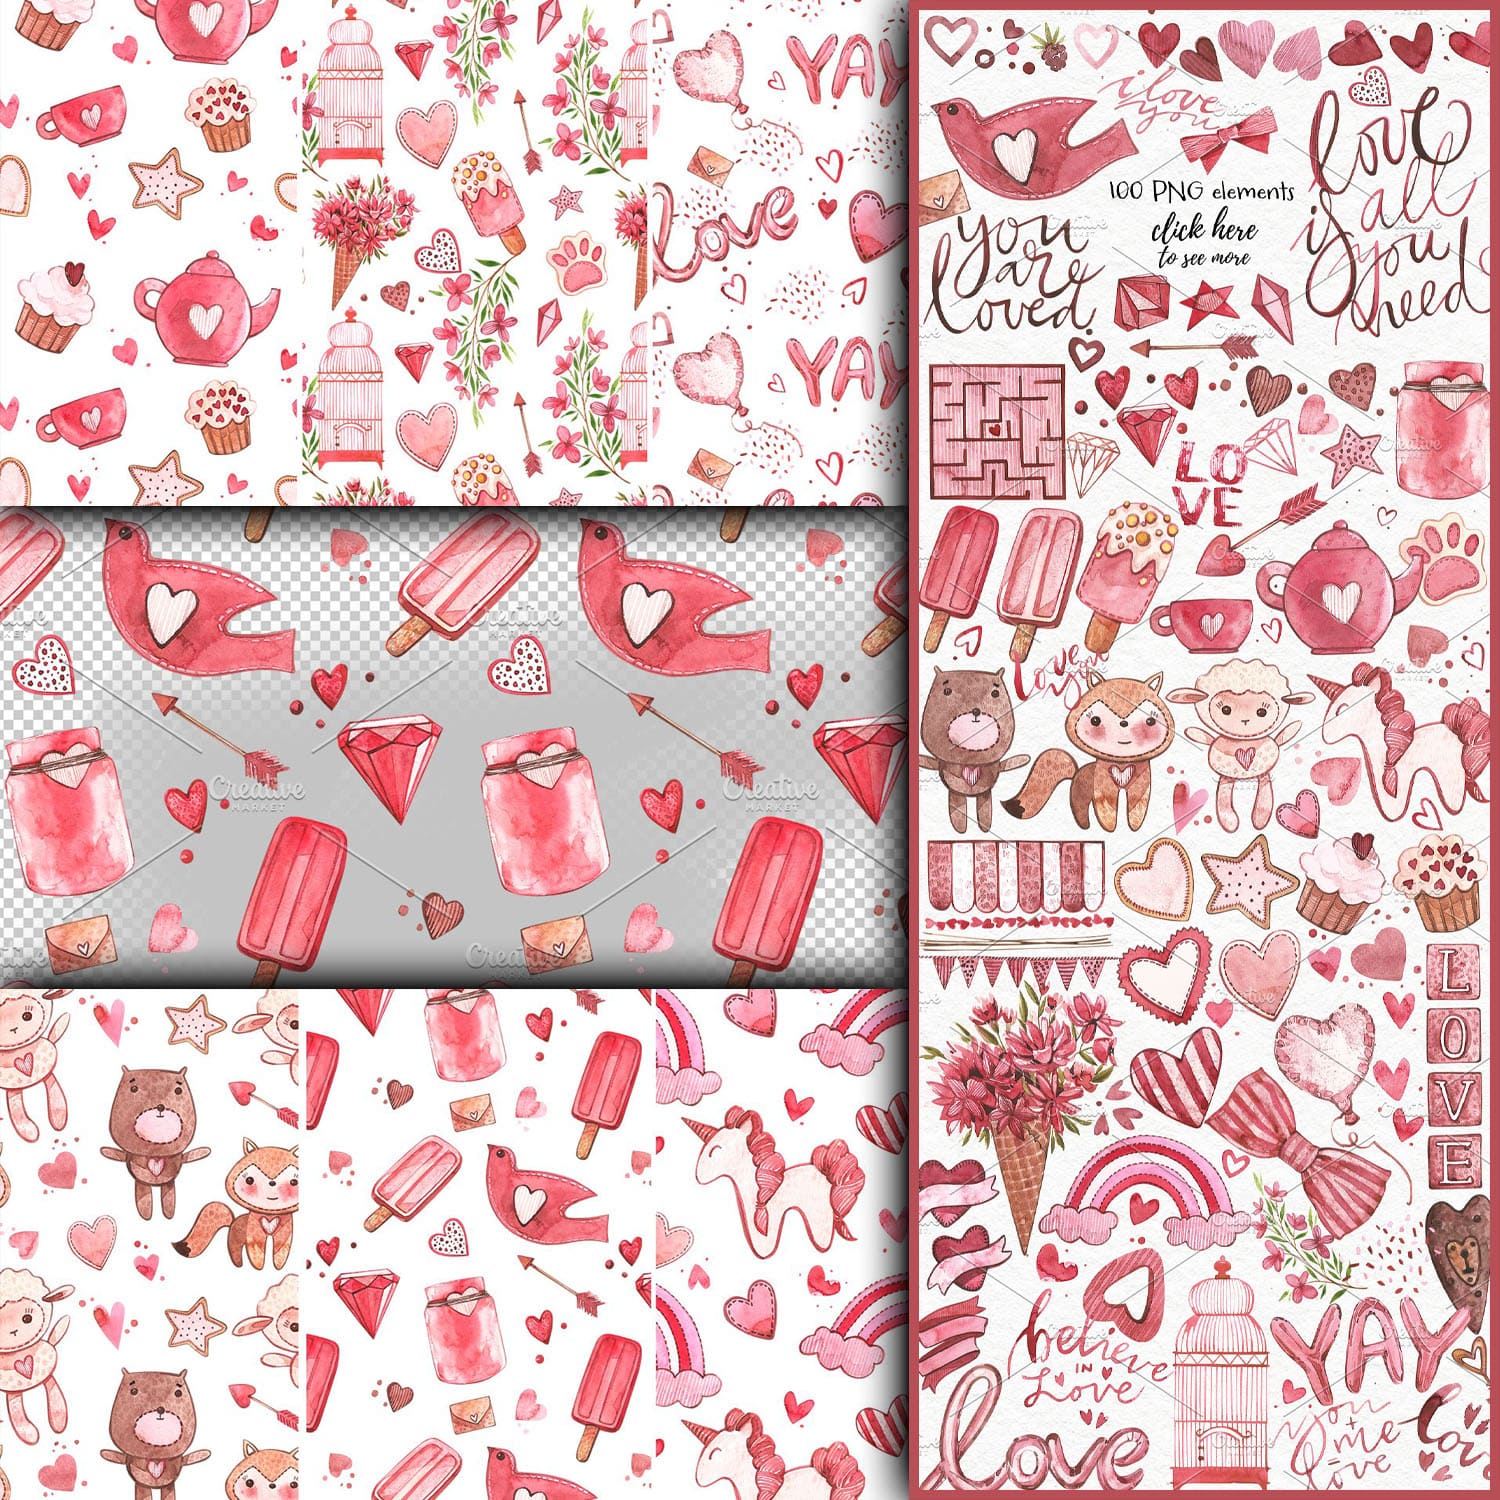 2202386 valentines day clipart 1500 1500 2 49